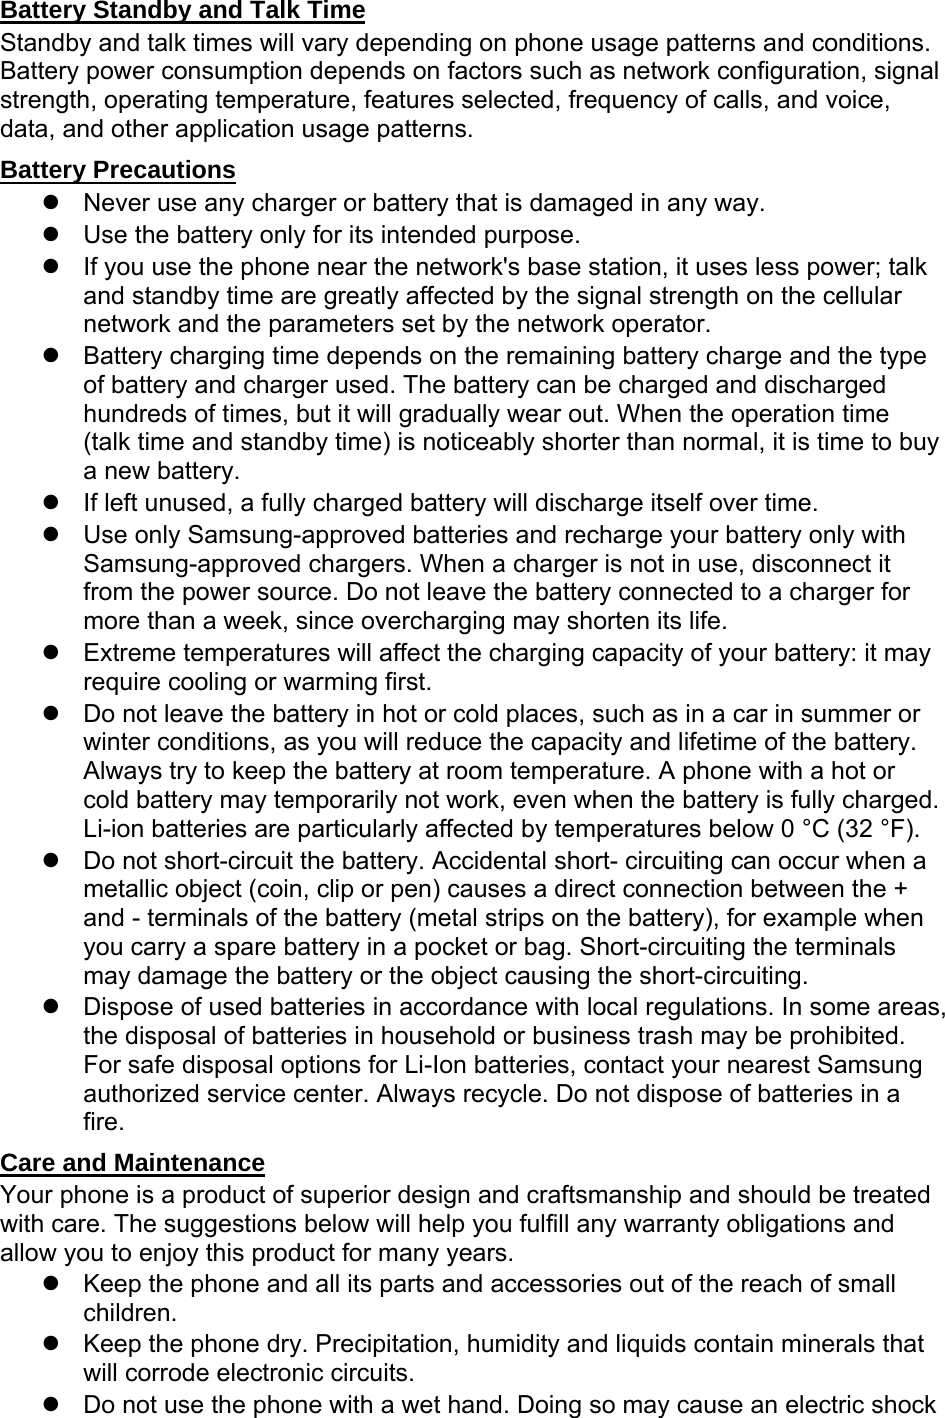 Battery Standby and Talk Time Standby and talk times will vary depending on phone usage patterns and conditions. Battery power consumption depends on factors such as network configuration, signal strength, operating temperature, features selected, frequency of calls, and voice, data, and other application usage patterns.   Battery Precautions z  Never use any charger or battery that is damaged in any way. z  Use the battery only for its intended purpose. z  If you use the phone near the network&apos;s base station, it uses less power; talk and standby time are greatly affected by the signal strength on the cellular network and the parameters set by the network operator. z  Battery charging time depends on the remaining battery charge and the type of battery and charger used. The battery can be charged and discharged hundreds of times, but it will gradually wear out. When the operation time (talk time and standby time) is noticeably shorter than normal, it is time to buy a new battery. z  If left unused, a fully charged battery will discharge itself over time. z  Use only Samsung-approved batteries and recharge your battery only with Samsung-approved chargers. When a charger is not in use, disconnect it from the power source. Do not leave the battery connected to a charger for more than a week, since overcharging may shorten its life. z  Extreme temperatures will affect the charging capacity of your battery: it may require cooling or warming first. z  Do not leave the battery in hot or cold places, such as in a car in summer or winter conditions, as you will reduce the capacity and lifetime of the battery. Always try to keep the battery at room temperature. A phone with a hot or cold battery may temporarily not work, even when the battery is fully charged. Li-ion batteries are particularly affected by temperatures below 0 °C (32 °F). z  Do not short-circuit the battery. Accidental short- circuiting can occur when a metallic object (coin, clip or pen) causes a direct connection between the + and - terminals of the battery (metal strips on the battery), for example when you carry a spare battery in a pocket or bag. Short-circuiting the terminals may damage the battery or the object causing the short-circuiting. z  Dispose of used batteries in accordance with local regulations. In some areas, the disposal of batteries in household or business trash may be prohibited. For safe disposal options for Li-Ion batteries, contact your nearest Samsung authorized service center. Always recycle. Do not dispose of batteries in a fire. Care and Maintenance Your phone is a product of superior design and craftsmanship and should be treated with care. The suggestions below will help you fulfill any warranty obligations and allow you to enjoy this product for many years. z  Keep the phone and all its parts and accessories out of the reach of small children. z  Keep the phone dry. Precipitation, humidity and liquids contain minerals that will corrode electronic circuits. z  Do not use the phone with a wet hand. Doing so may cause an electric shock 